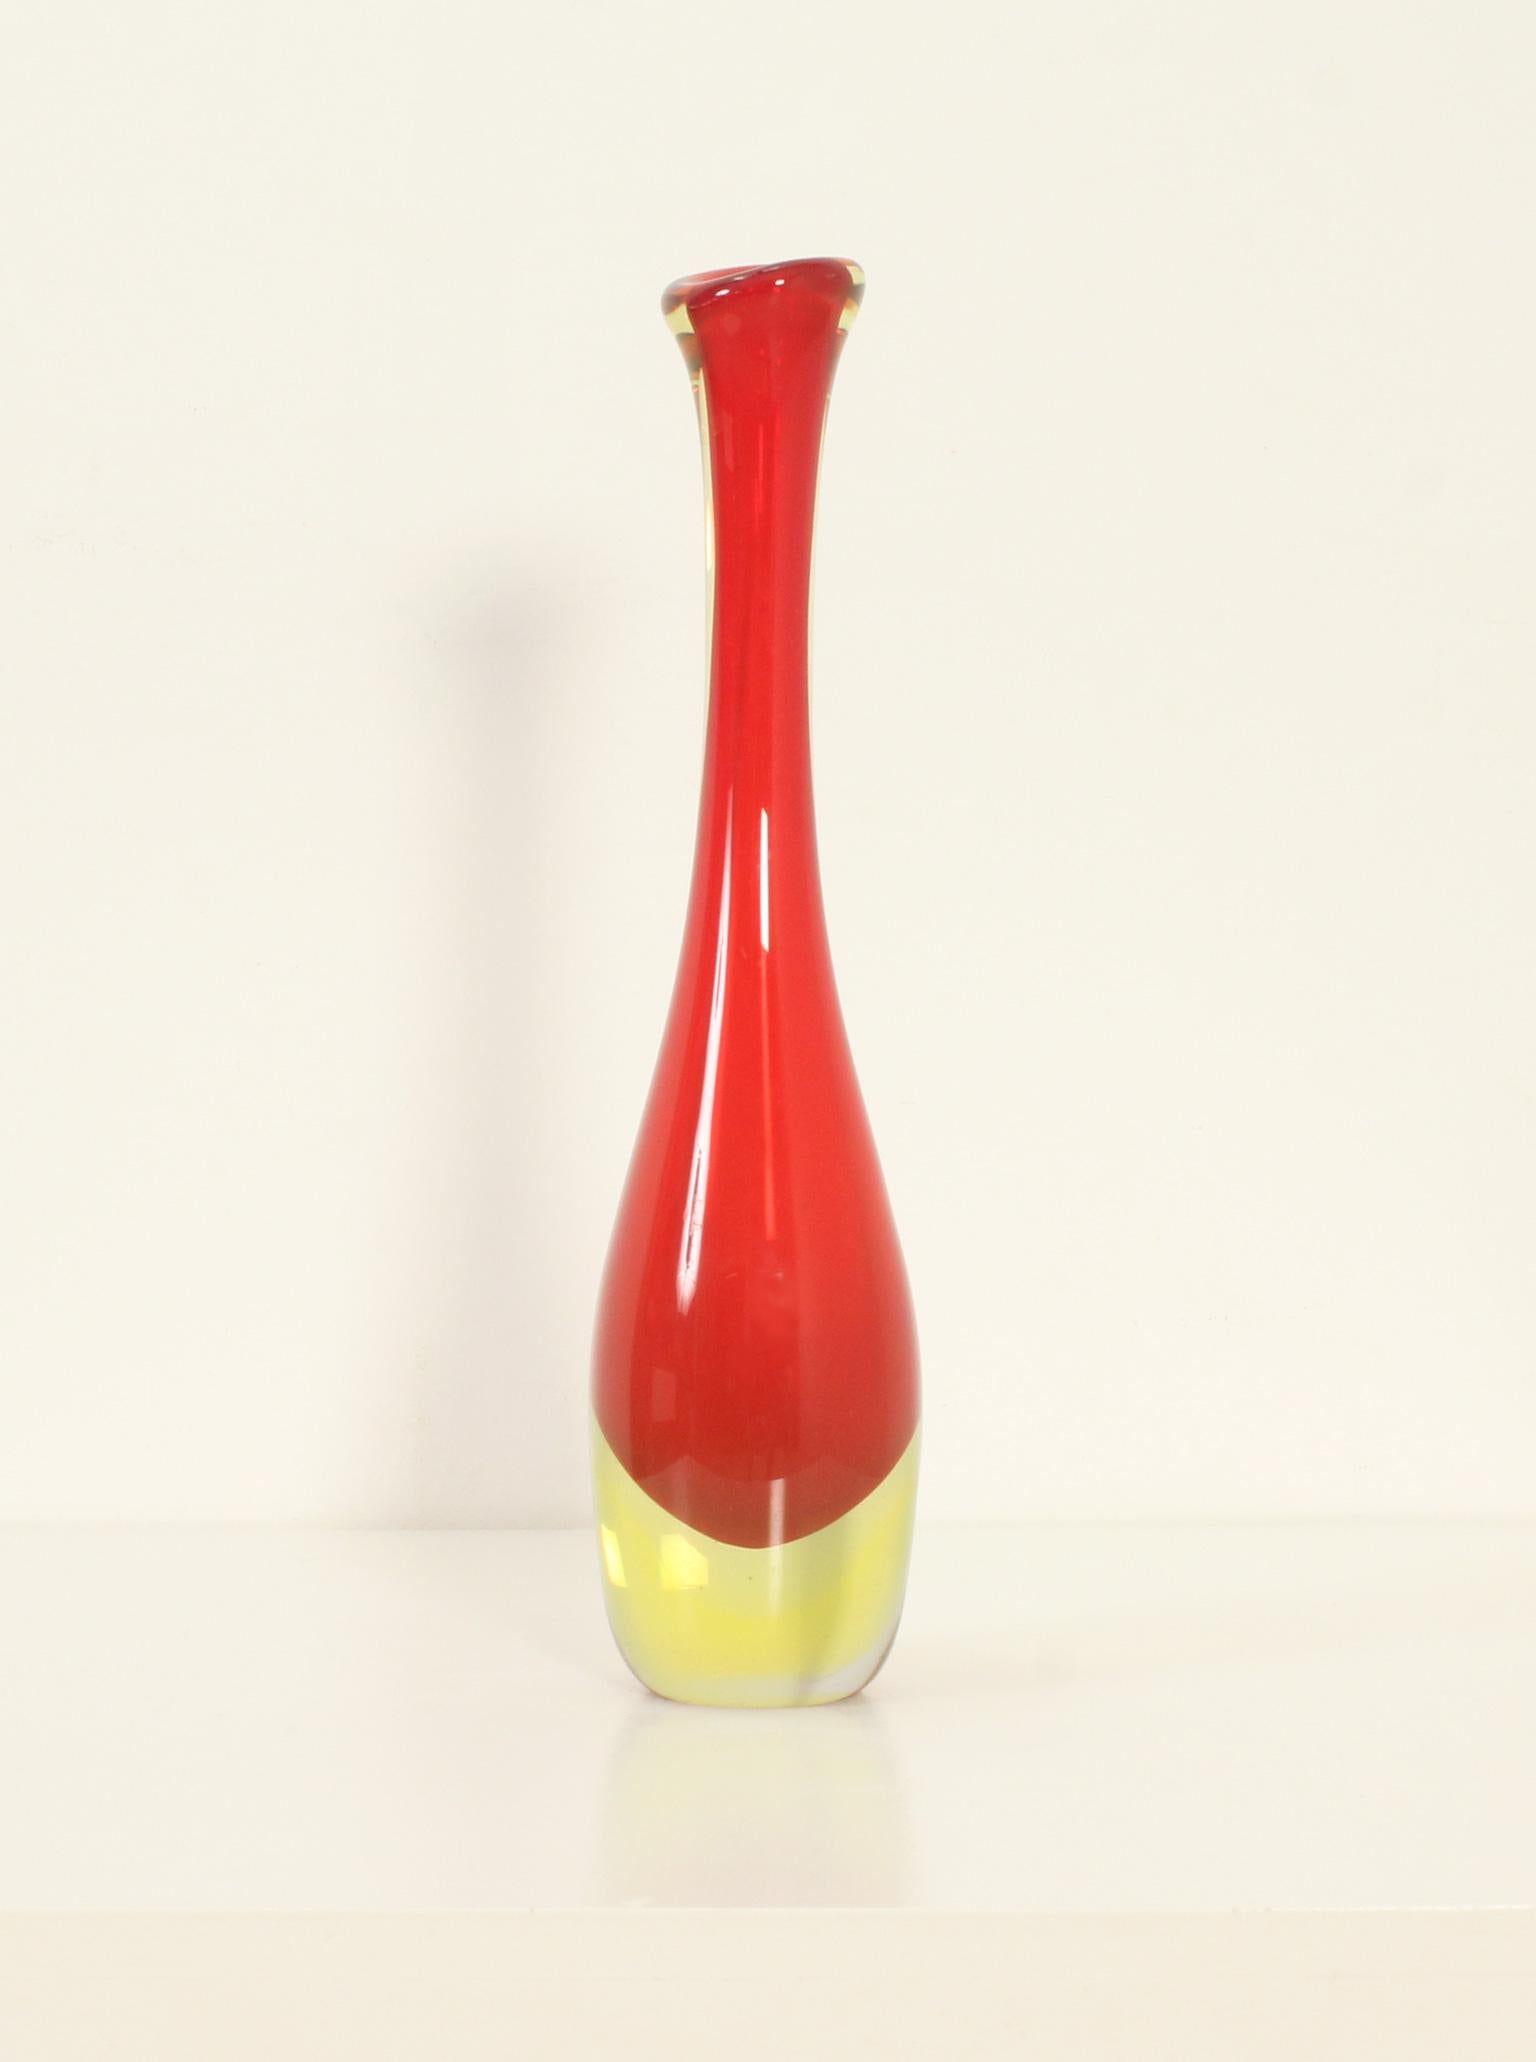 Large Murano glass vase with narrow neck from 1960's, Italy. Hand blown Sommerso glass in red and iridescent green color. 